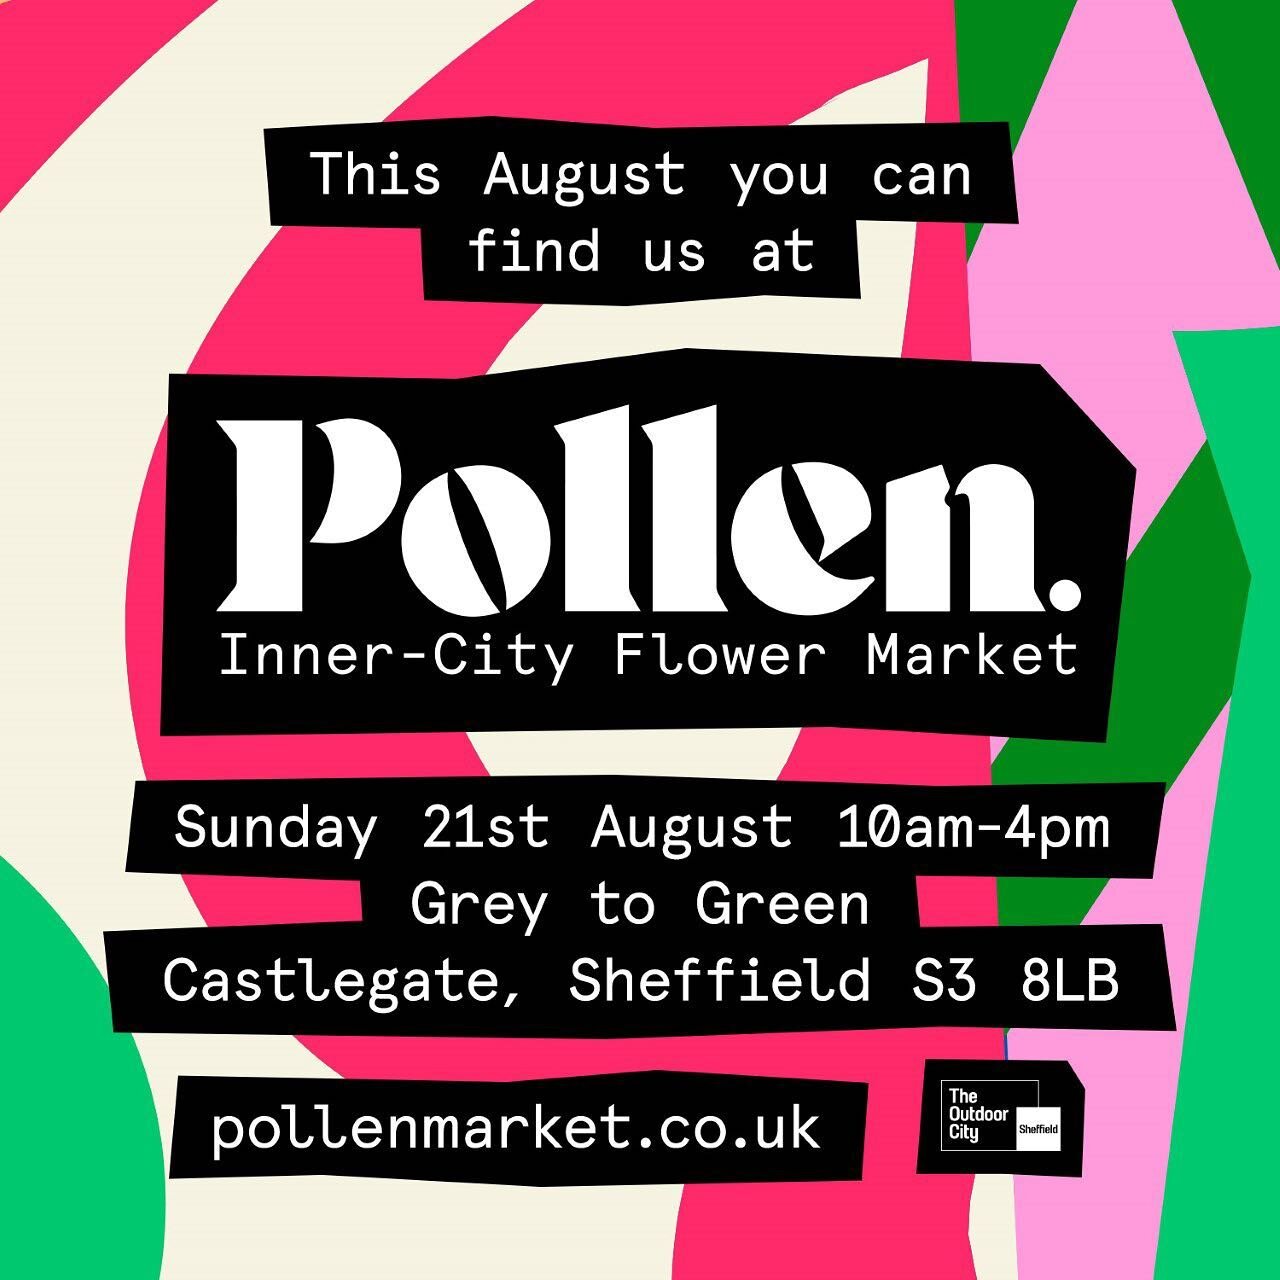 Excited to be taking part with a stall for our first @pollenmarketsheffield experience on Sunday. 

We will be featuring our grafted heritage apple trees ready for planting alongside Sheffield Made Hampers including our own Foragers Hamper with goodi